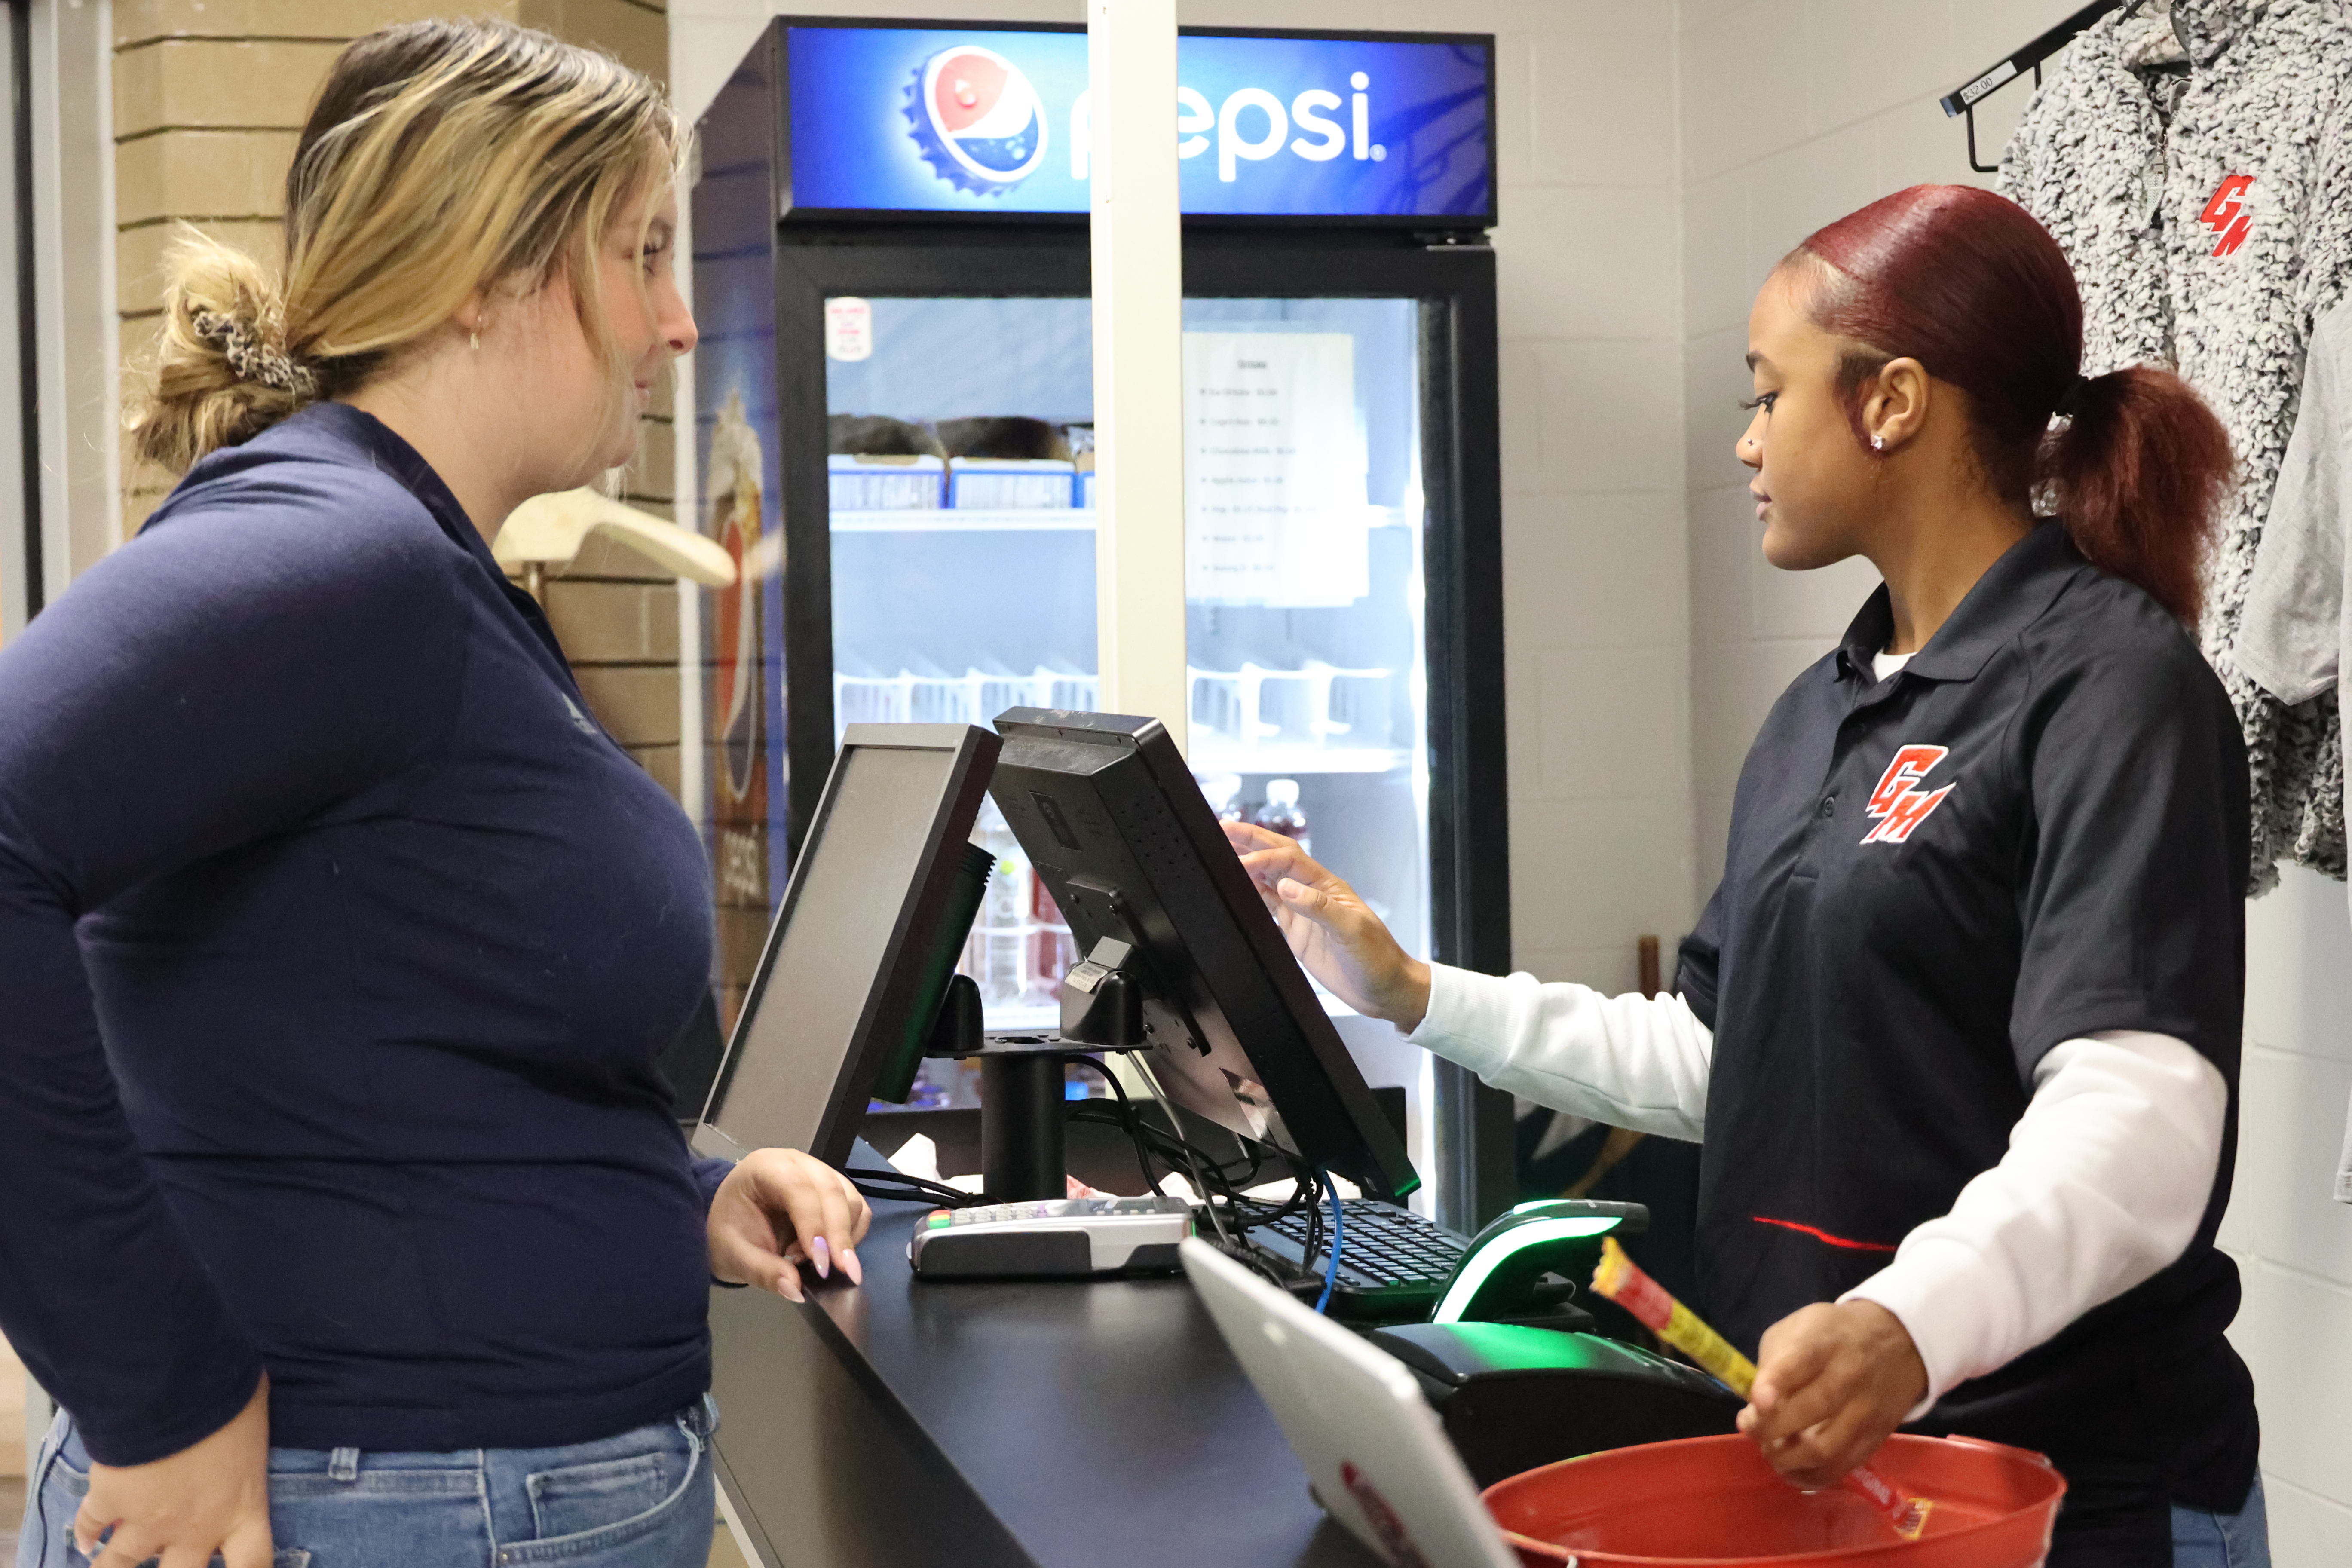 A Black, female student assists another White student at the cash register.